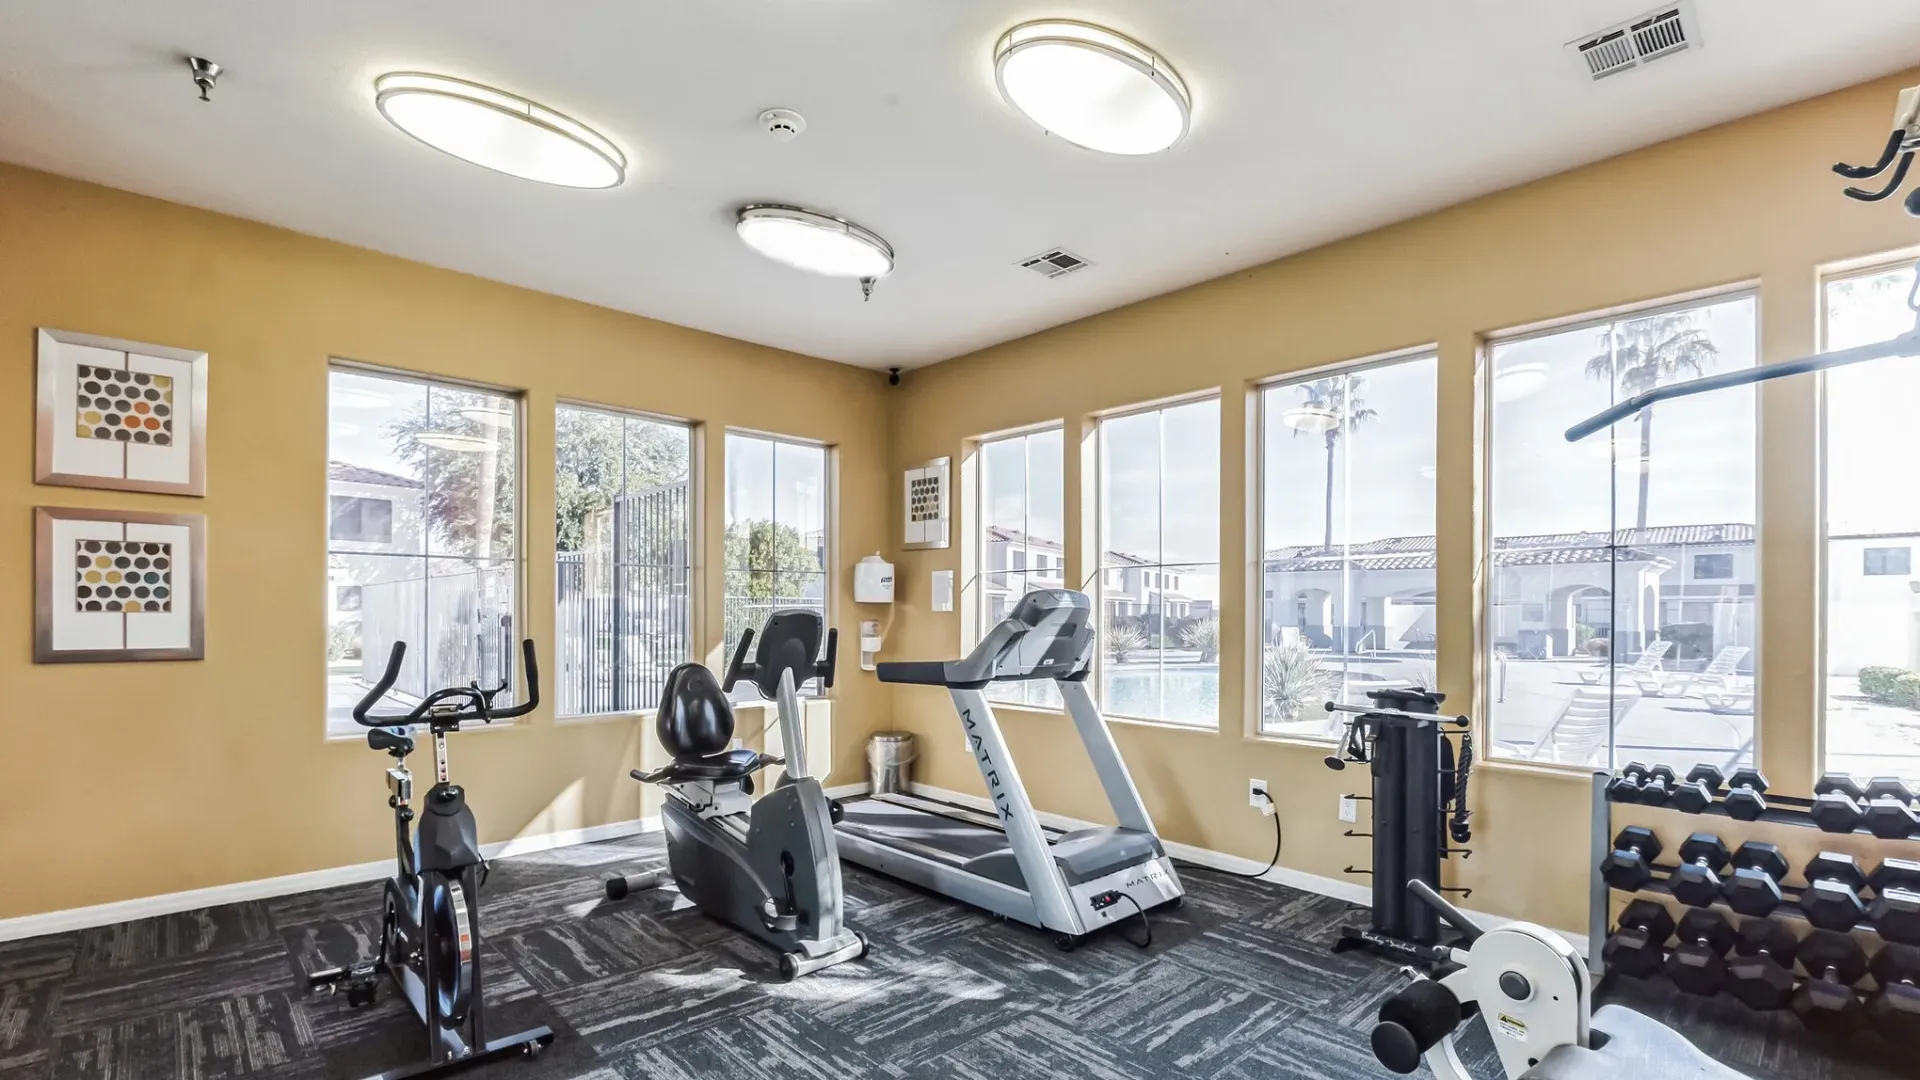 A fitness center with cardio and weight training equipment